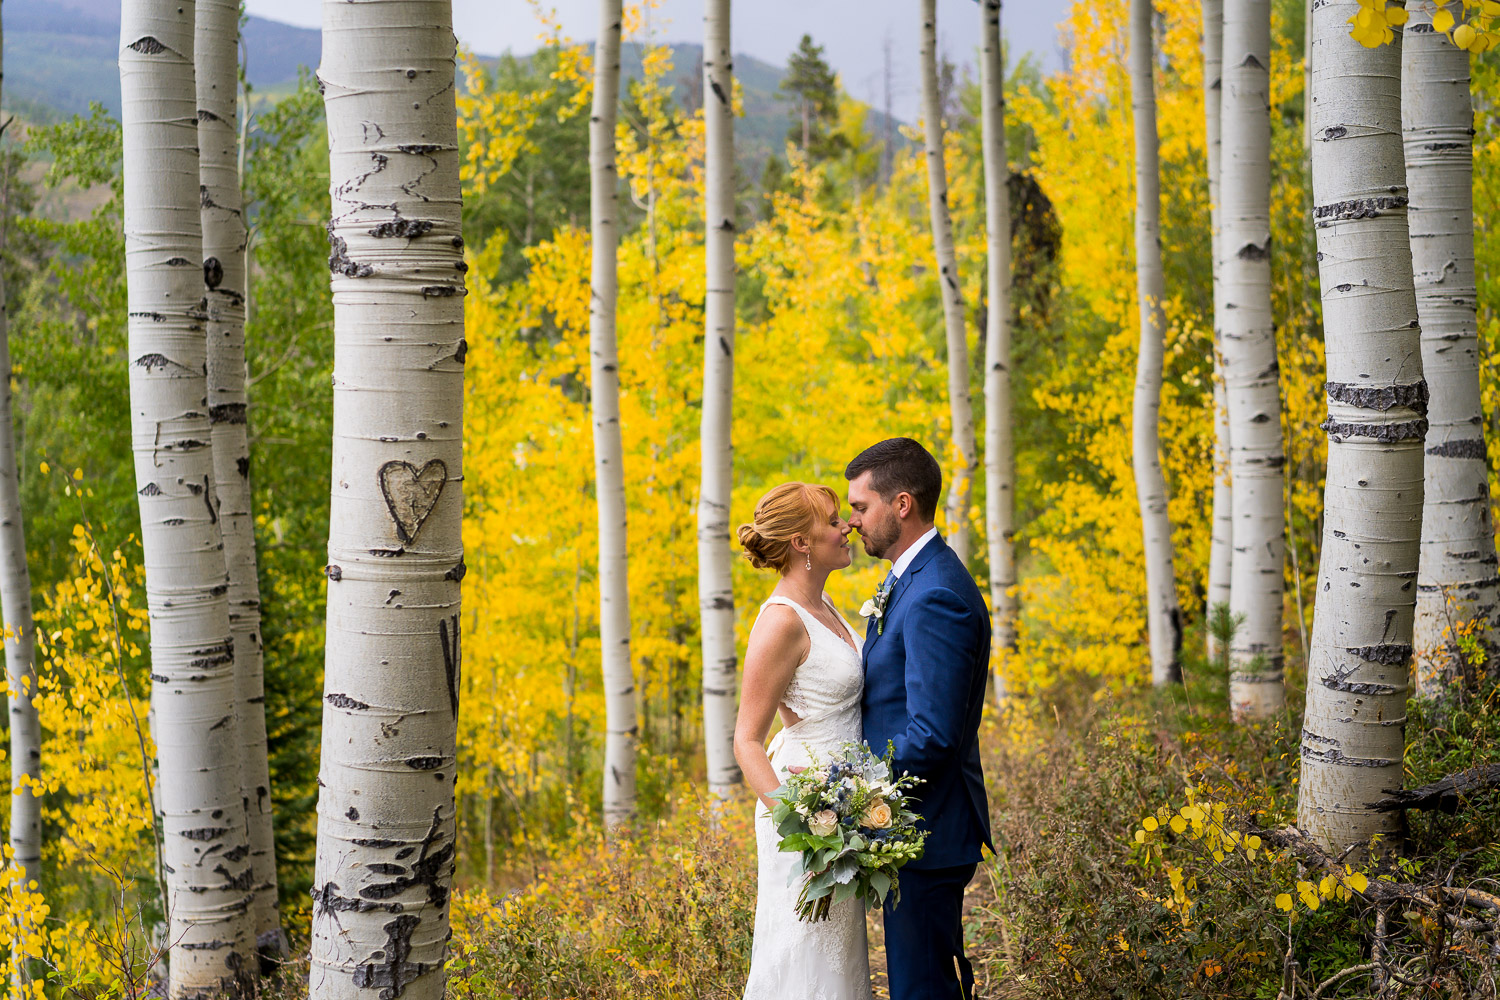 Vail Wedding Deck Fall Couple Portraits in Aspen Trees